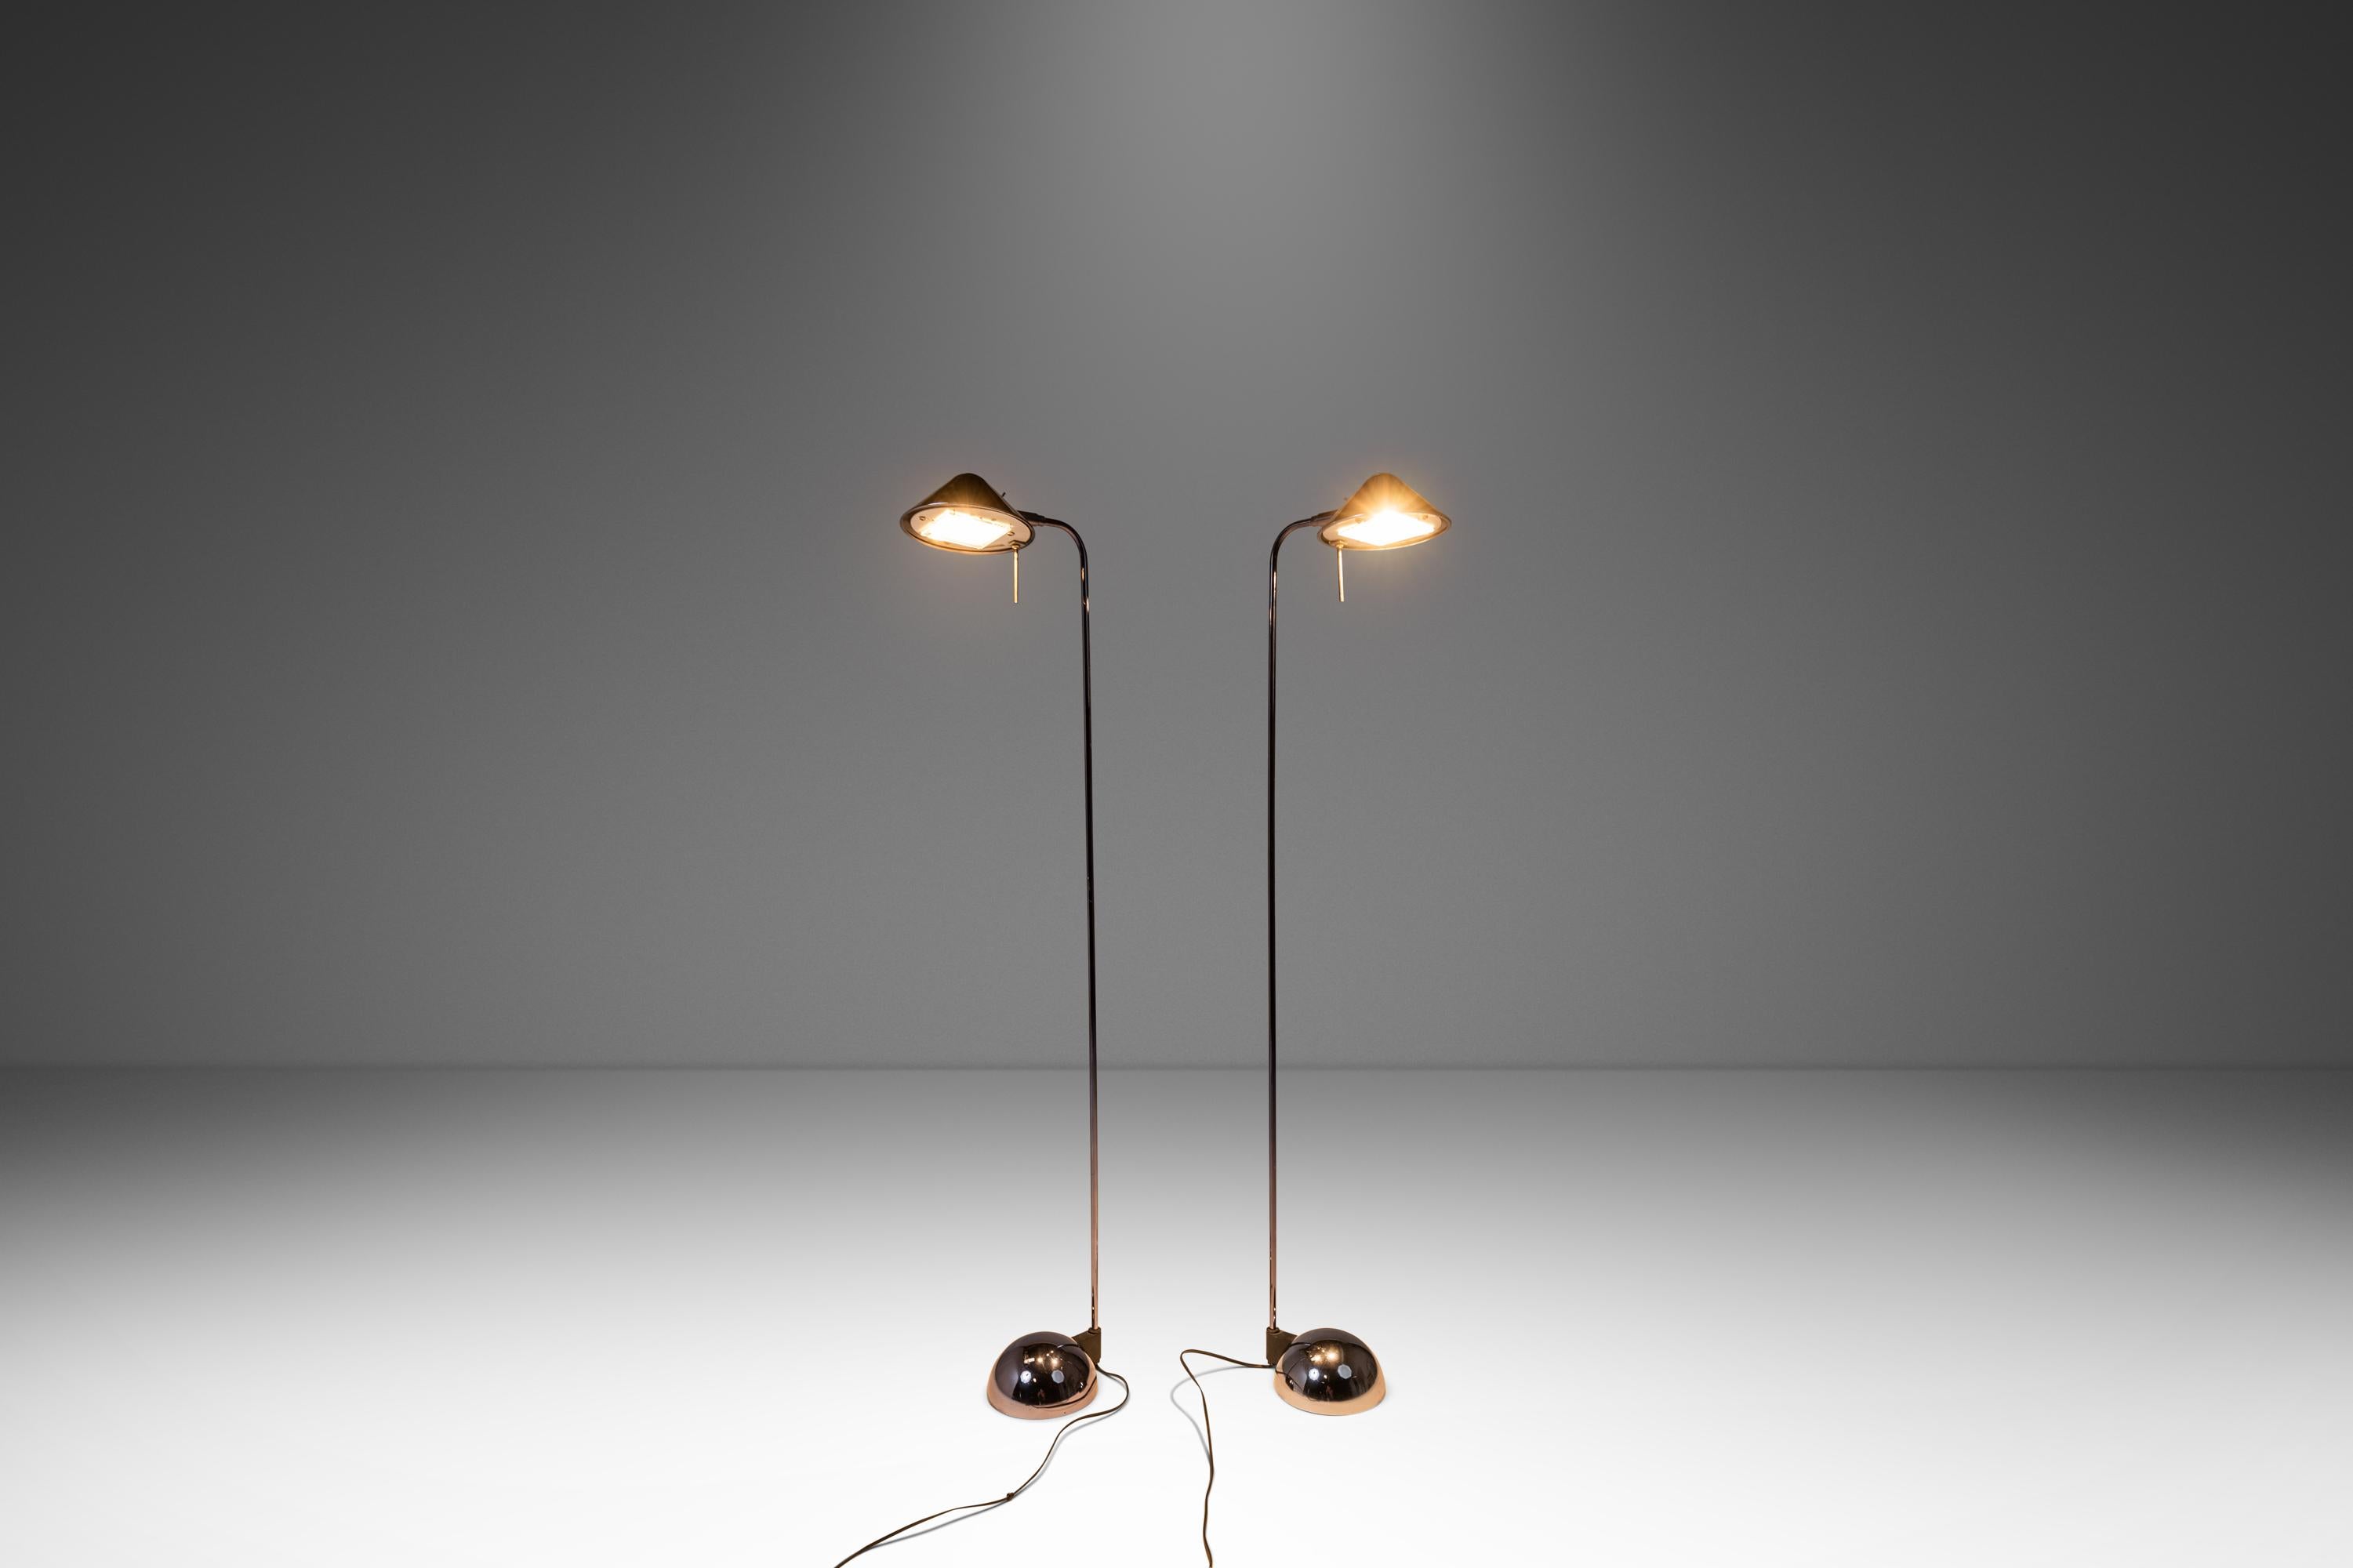 Introducing a true American Modern masterpiece: a rare set of two Post Modern floor lamps designed by the renowned Robert Sonneman for George Kovacs. Constructed from steel with a sultry midnight chrome finish these exceptional floor lamps swivel up